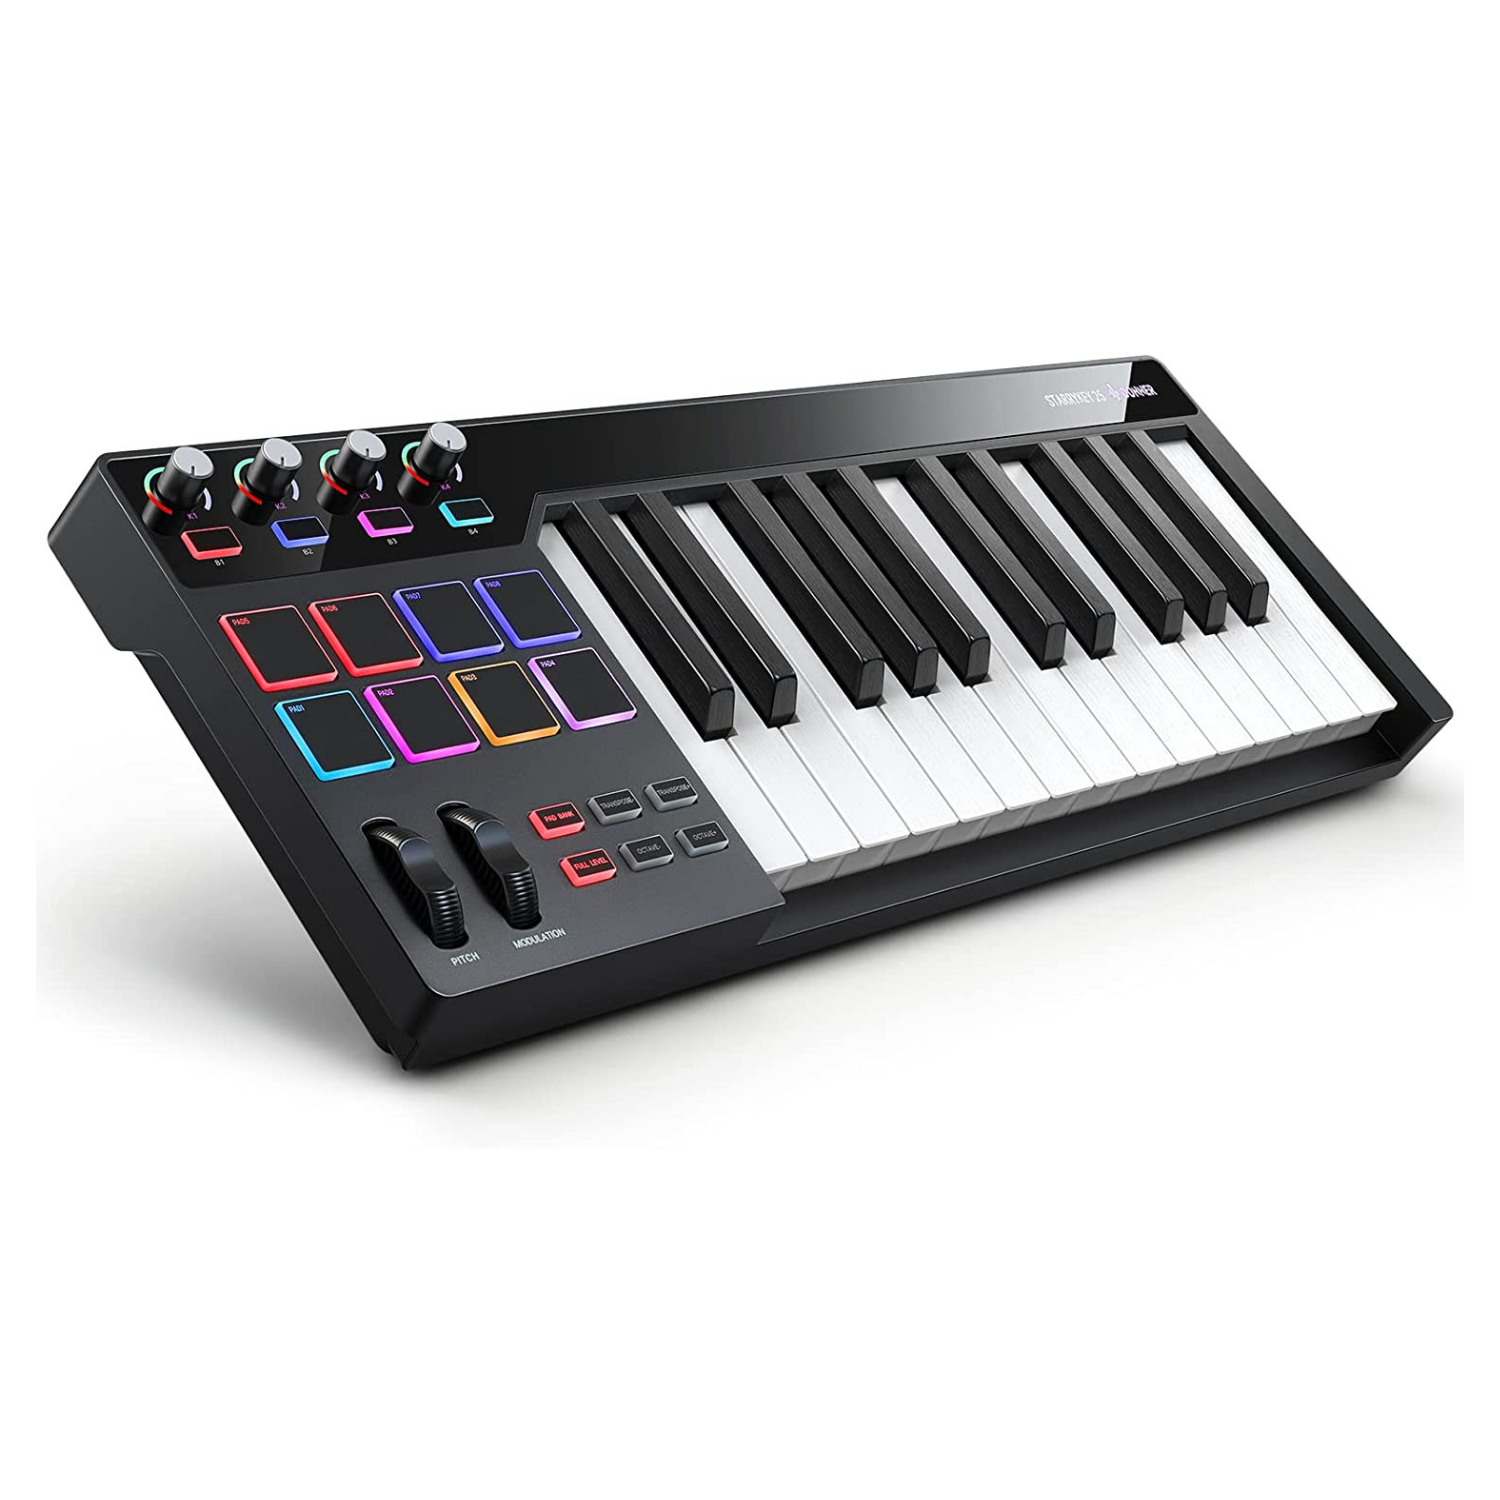 Donner STARRYKEY 25 MIDI Keyboard Controller with Full-sized 25 Keys -  Donner Musical instrument